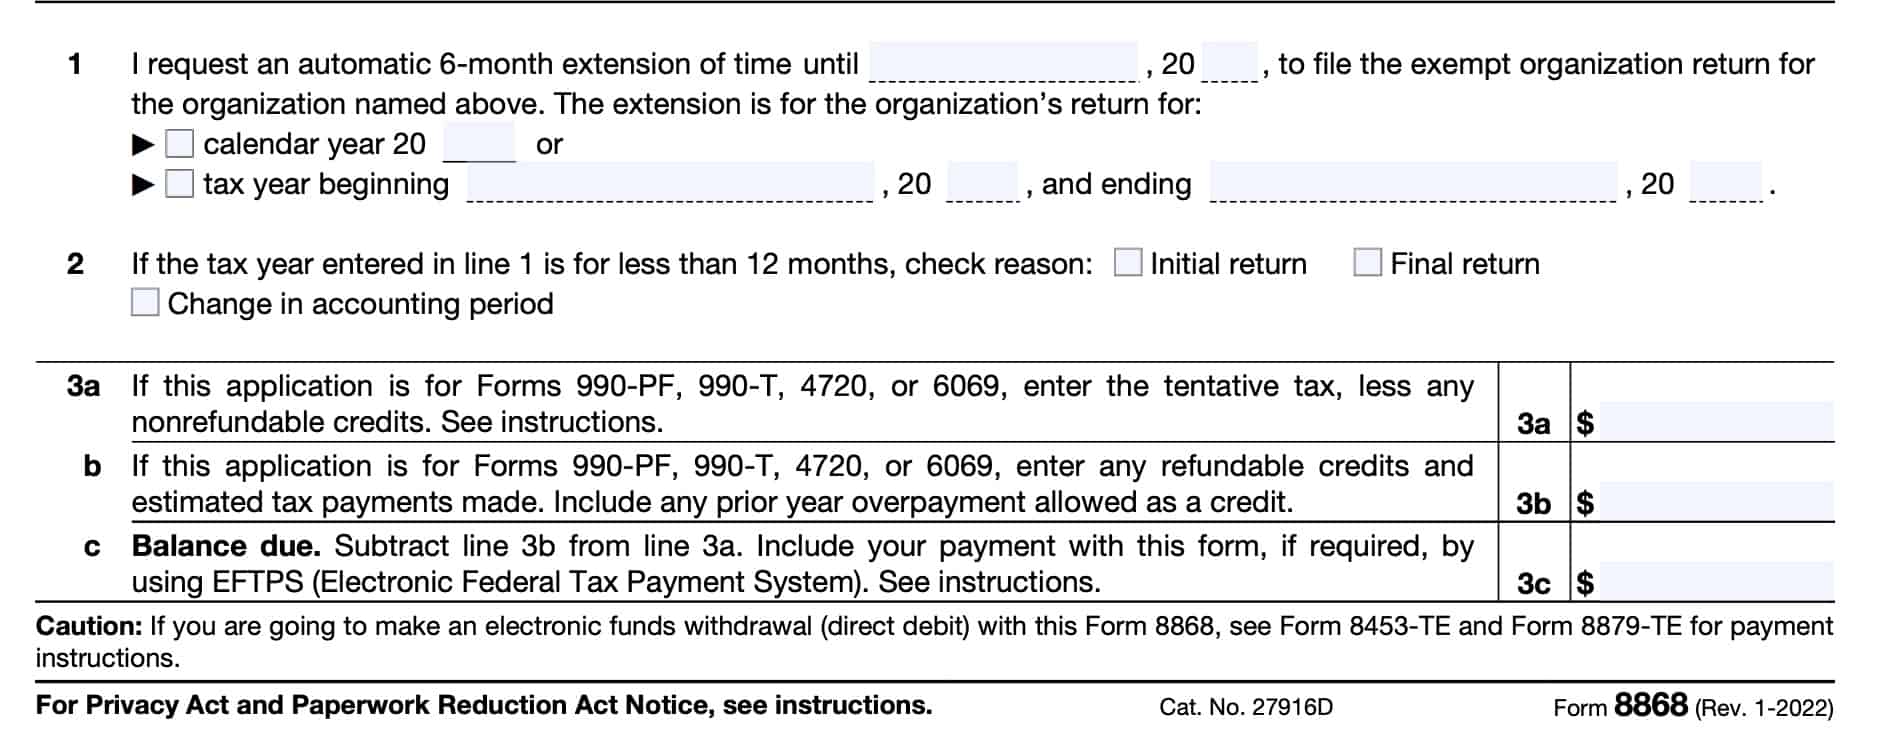 irs form 8868 6-month extension request